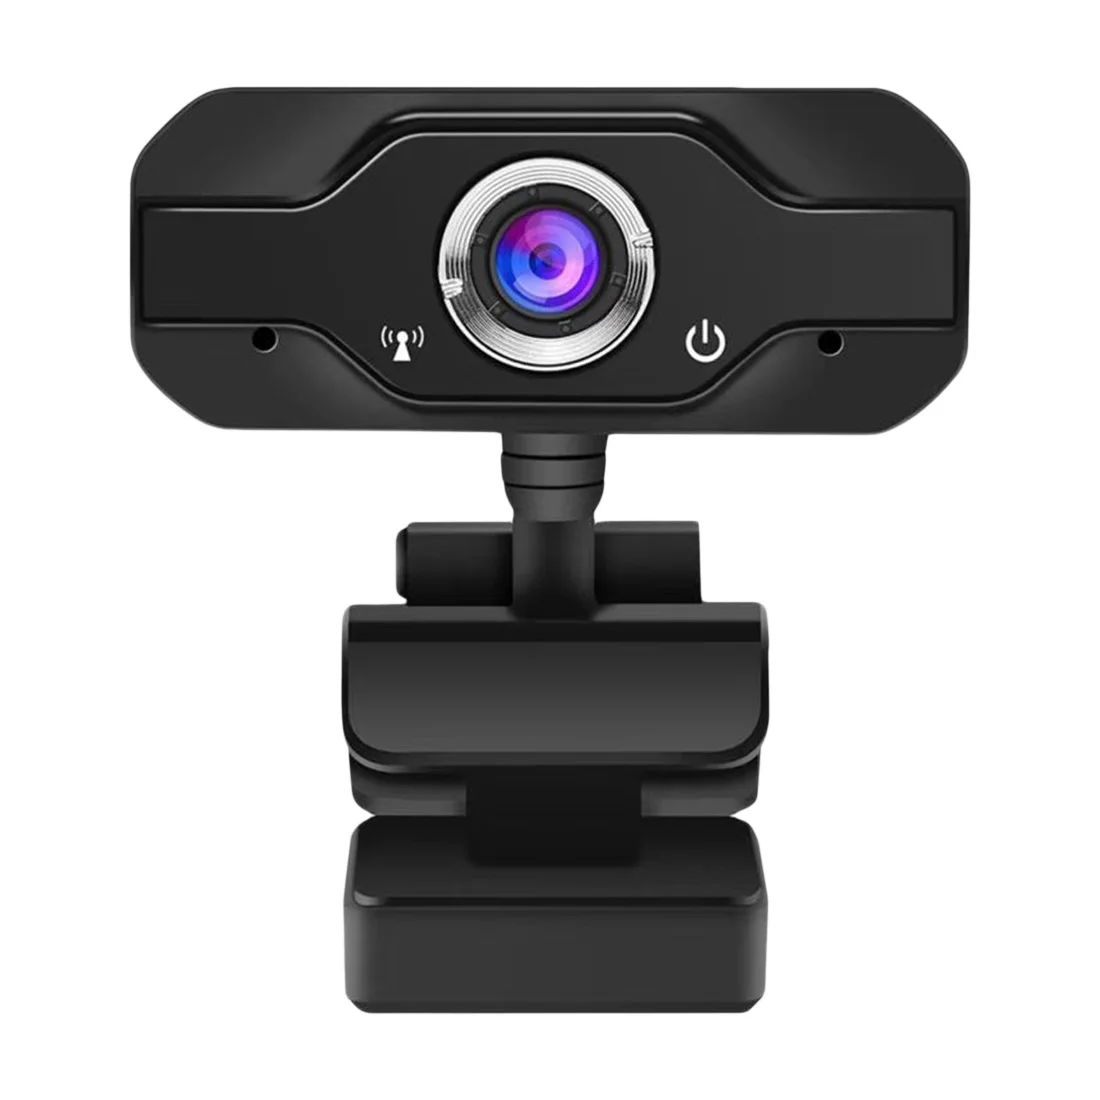 

HD Webcam Mini Computer PC WebCamera USB Driver-Free Built-In Dual Microphones for Live Broadcast Video Calling Conference Work